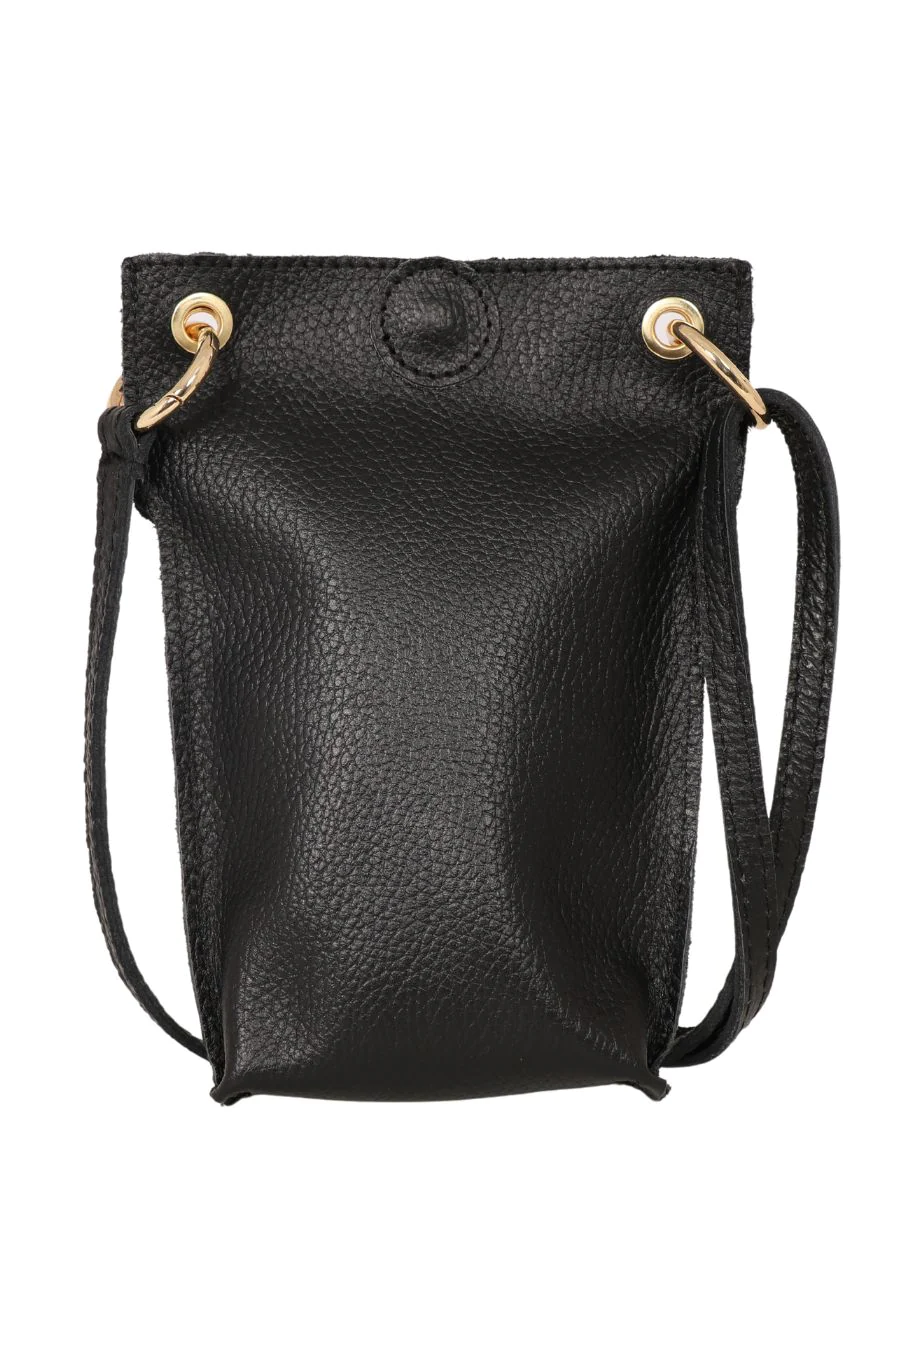 MSH ITALIAN LEATHER CROSSBODY PHONE POUCH